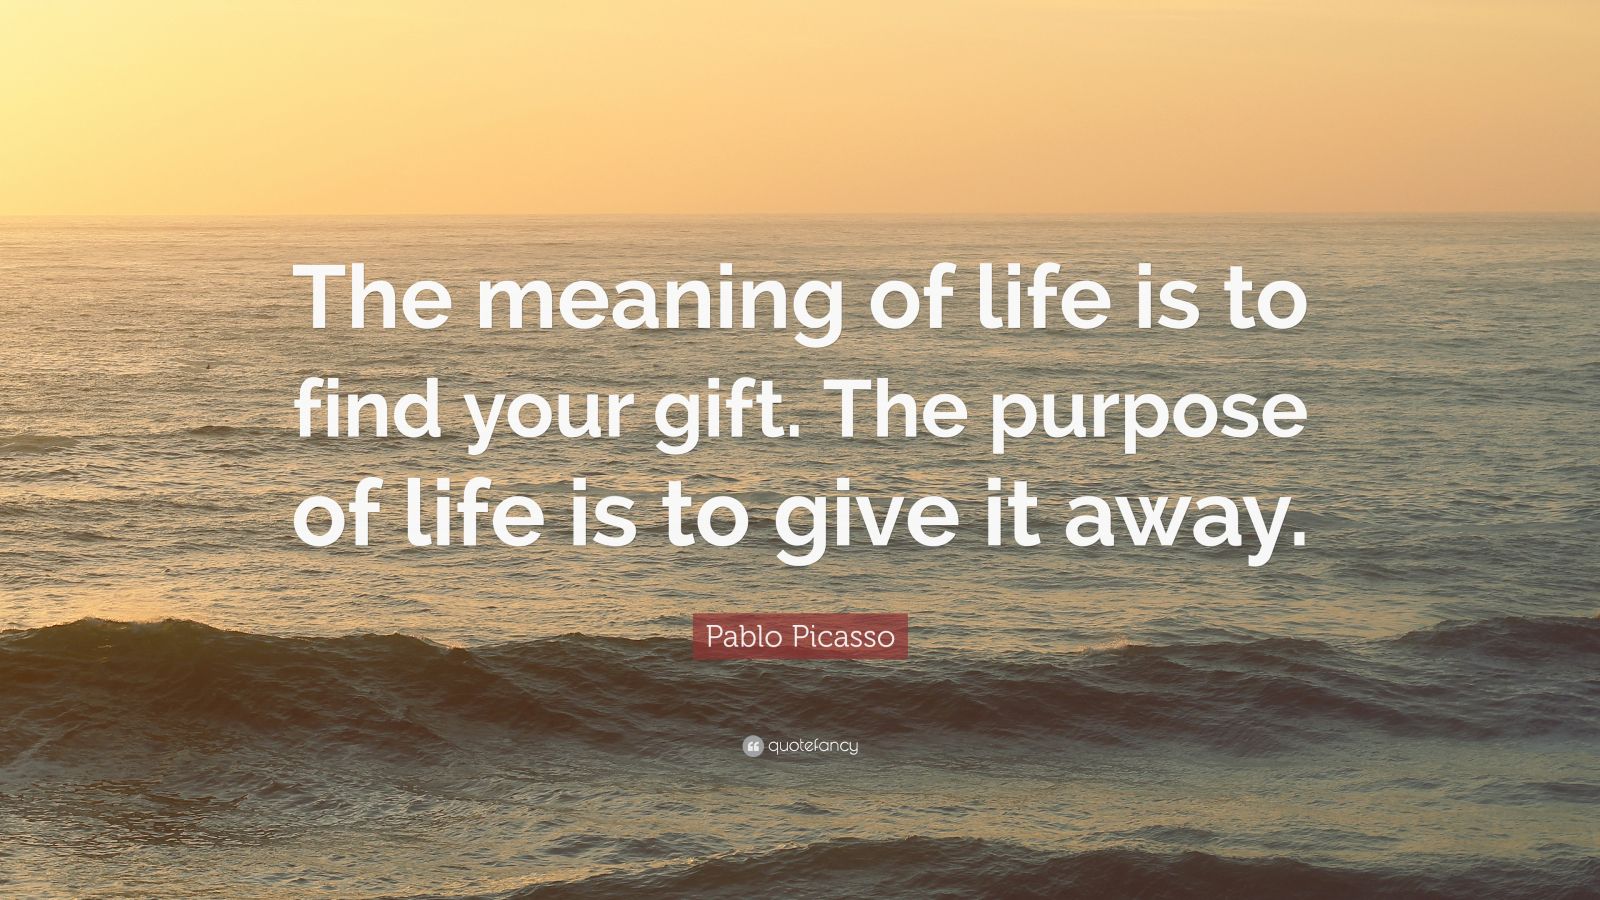 Pablo Picasso Quote: "The meaning of life is to find your ...